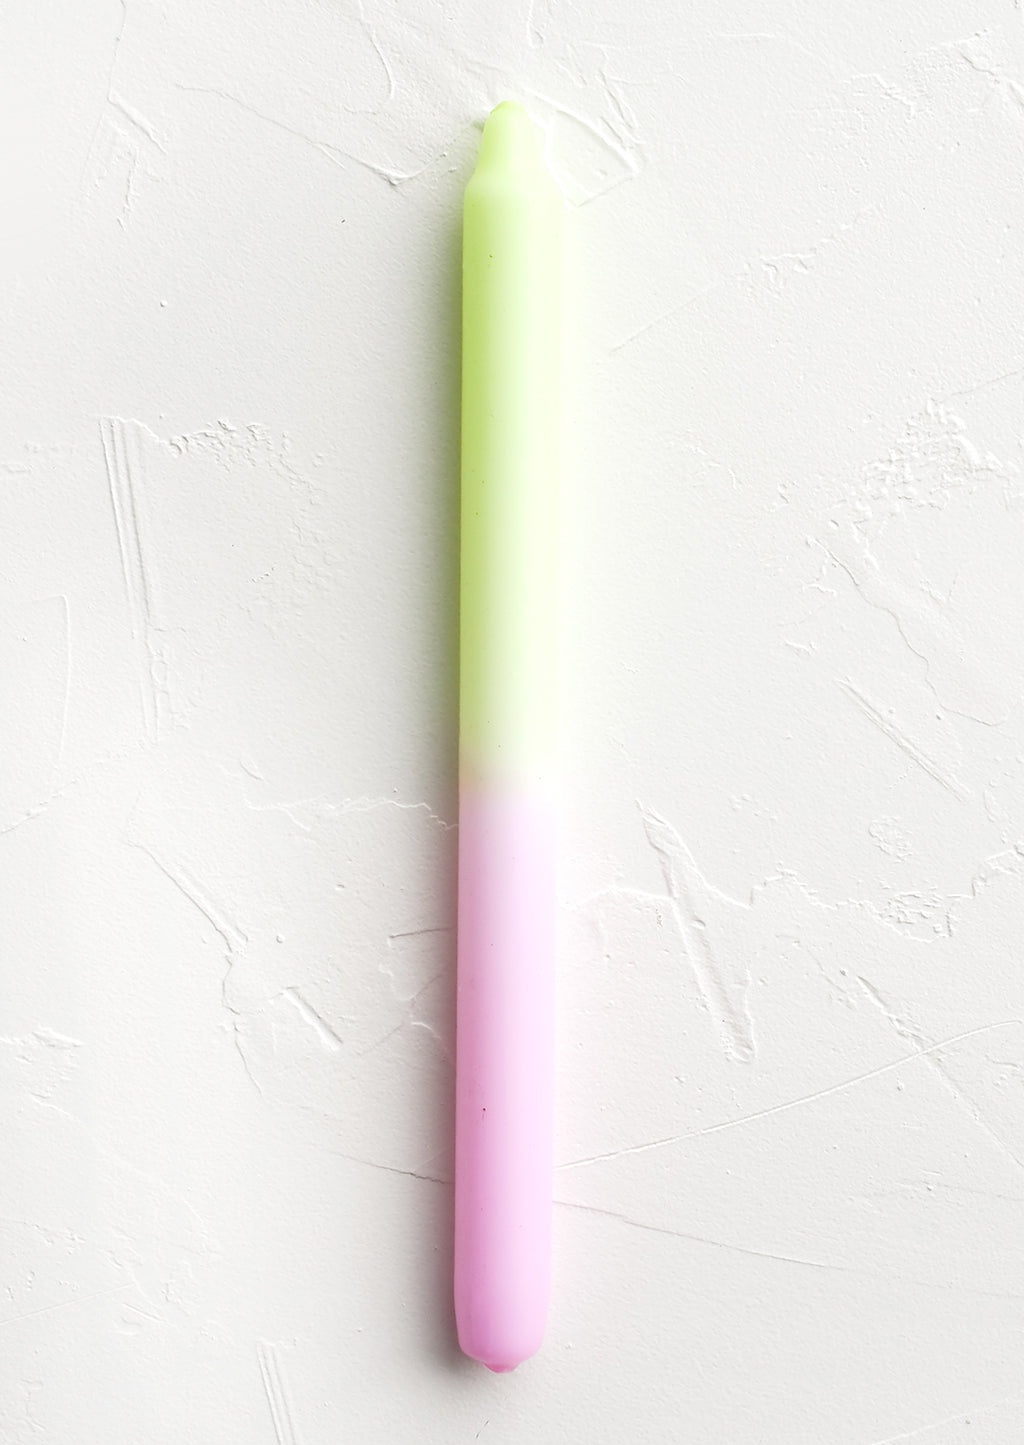 Neon Yellow / Pink: A straight taper candle in neon yellow and pink.